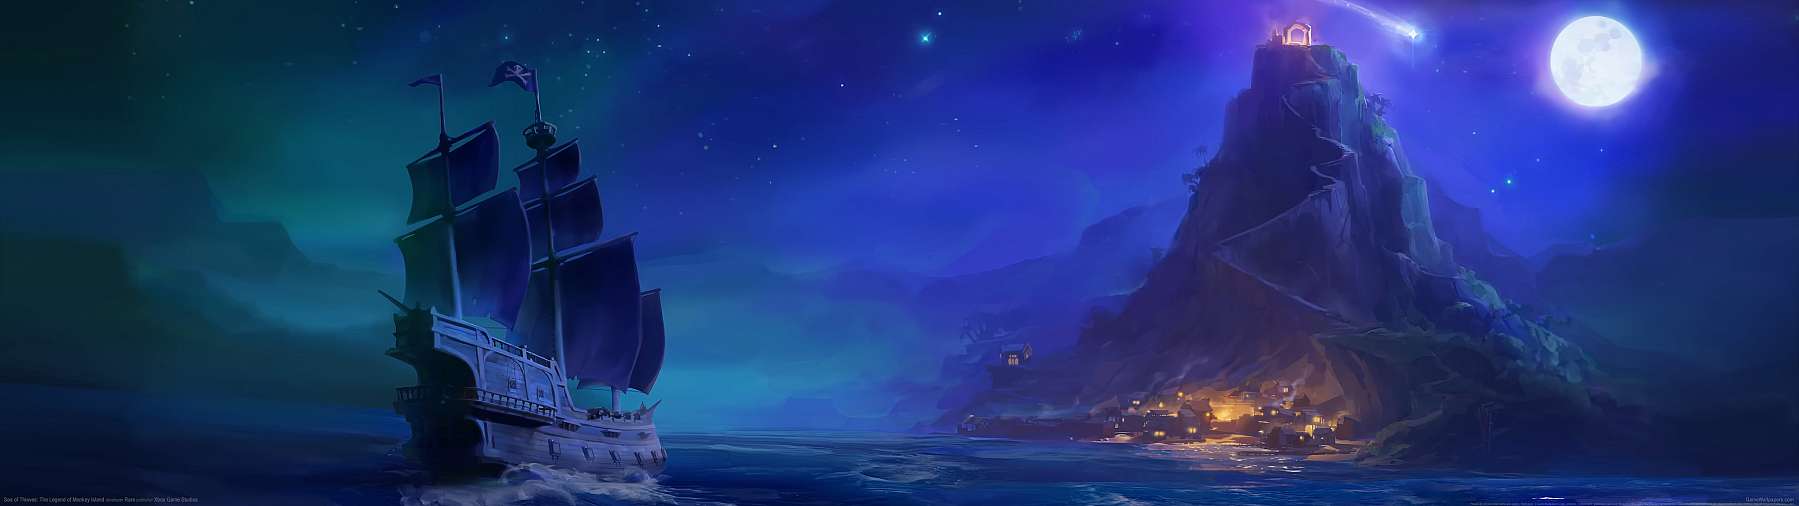 Sea of Thieves: The Legend of Monkey Island superwide wallpaper or background 01